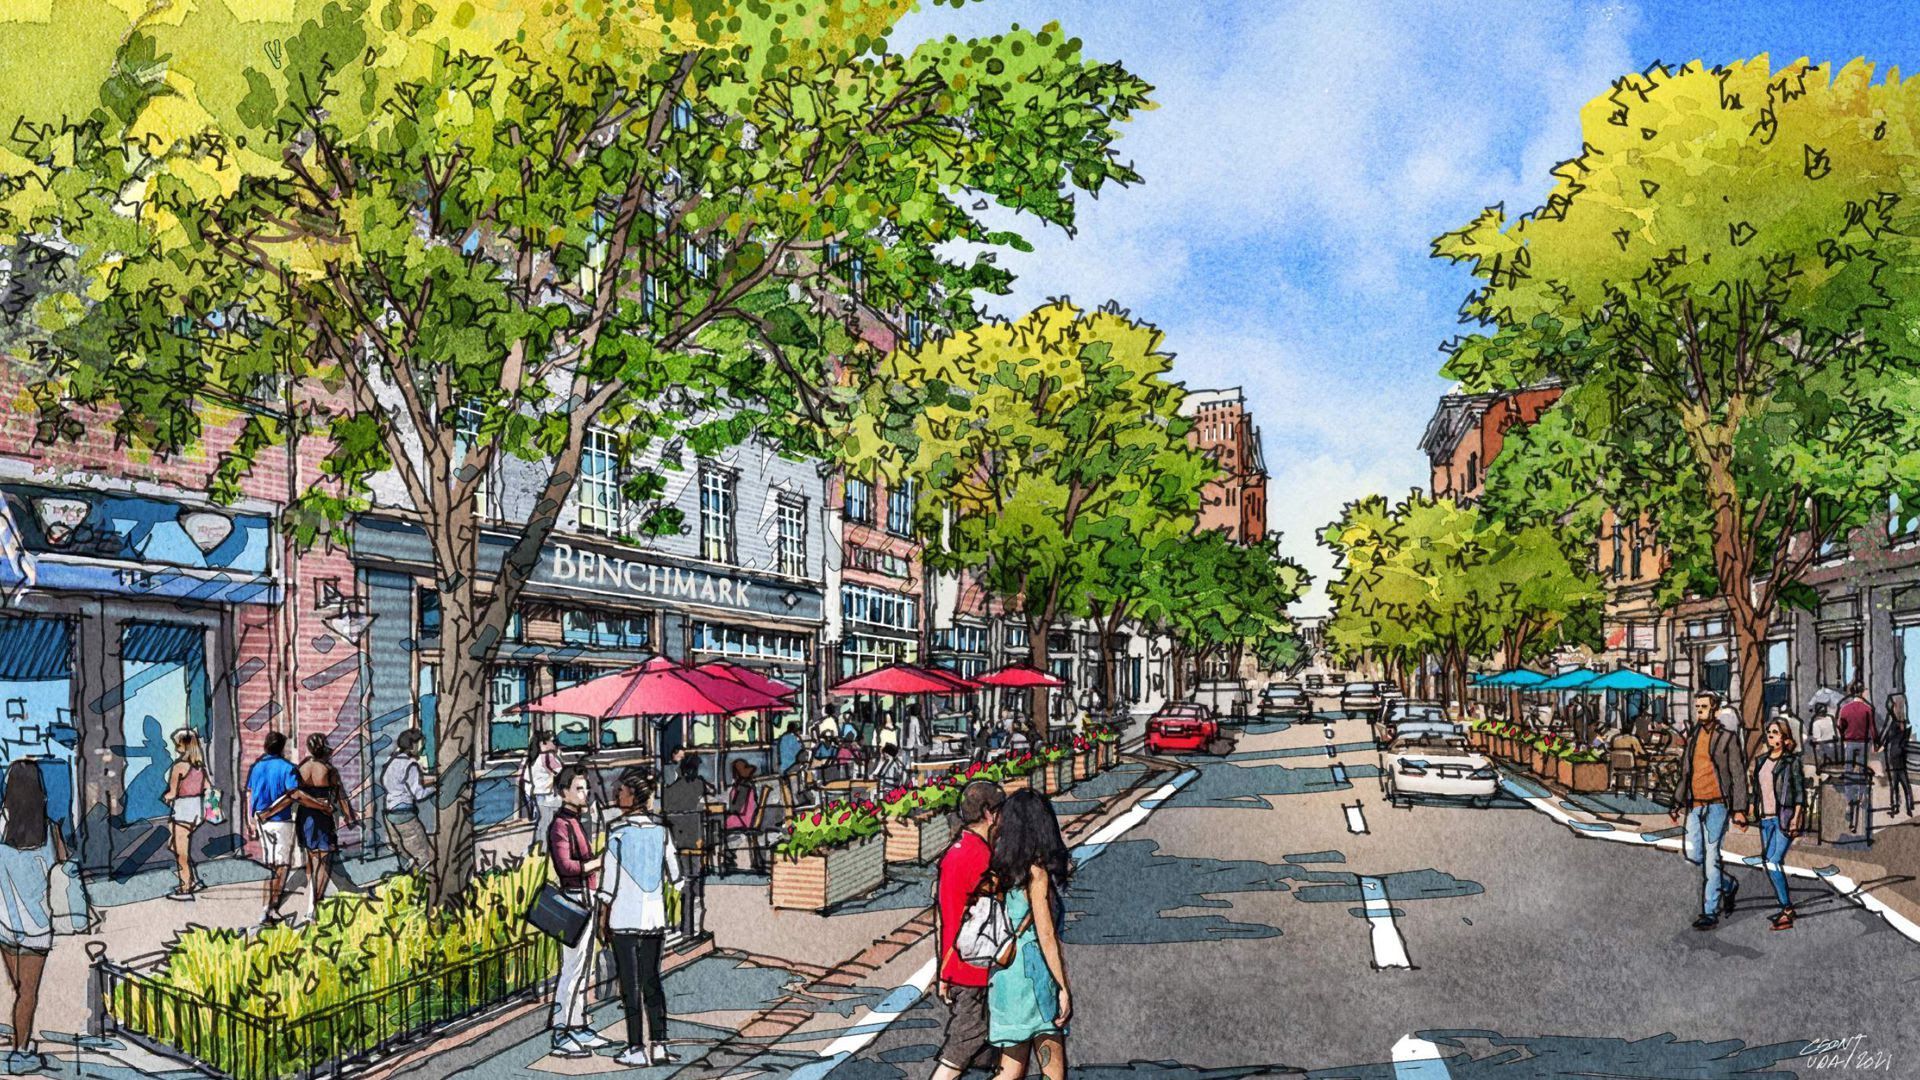 Rendering of a redesigned Second Avenue provided by Mayor John Cooper's office with tree-lined streets 